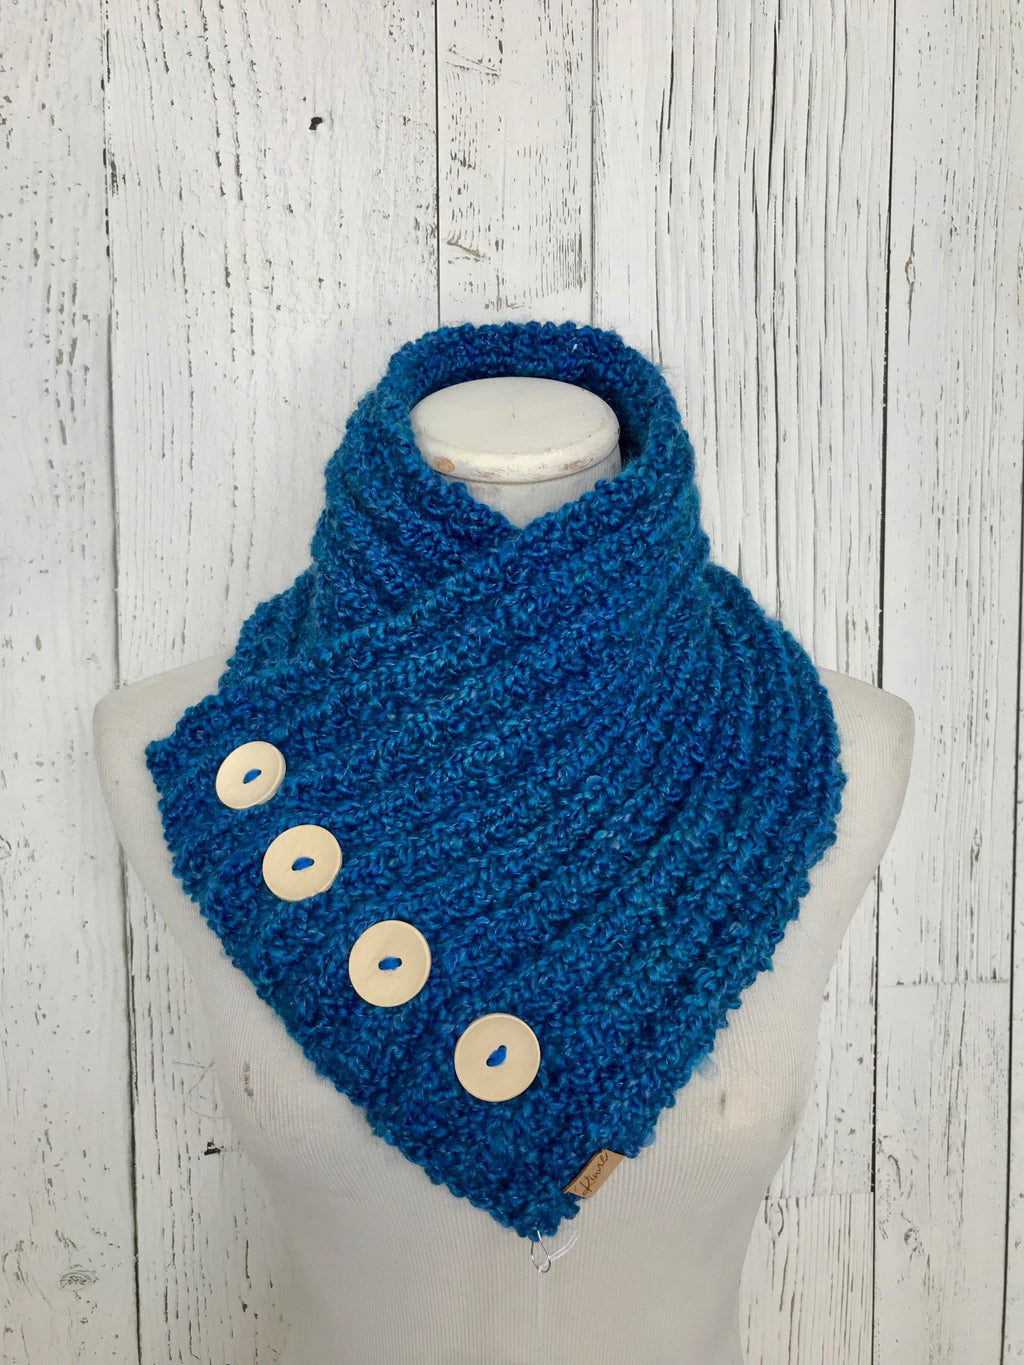 Classic Knit Button Cowl in cobalt blue with natural wood buttons